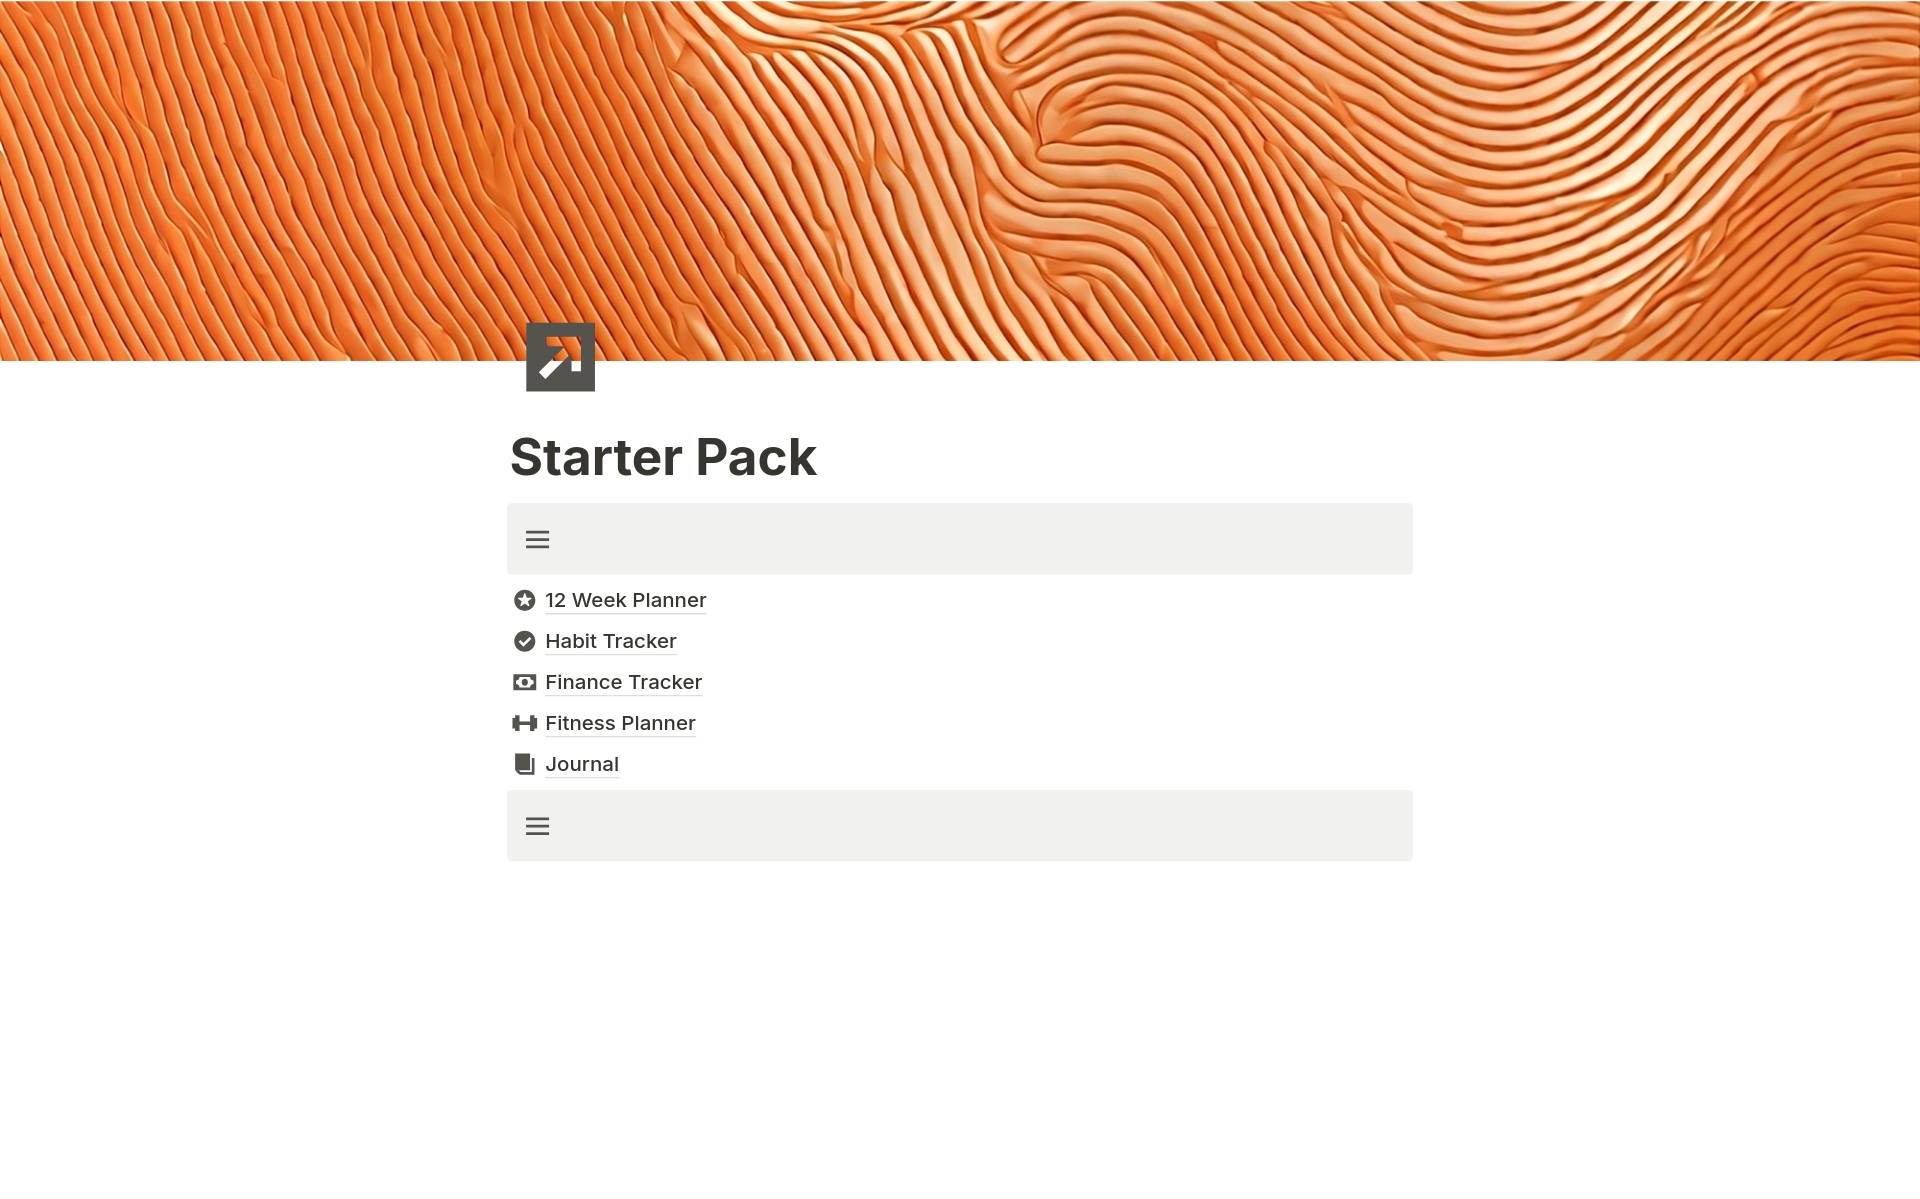 Start organizing your life the right way.

Get everything you need in your Notion Workspace in one pack of 5 unique templates.